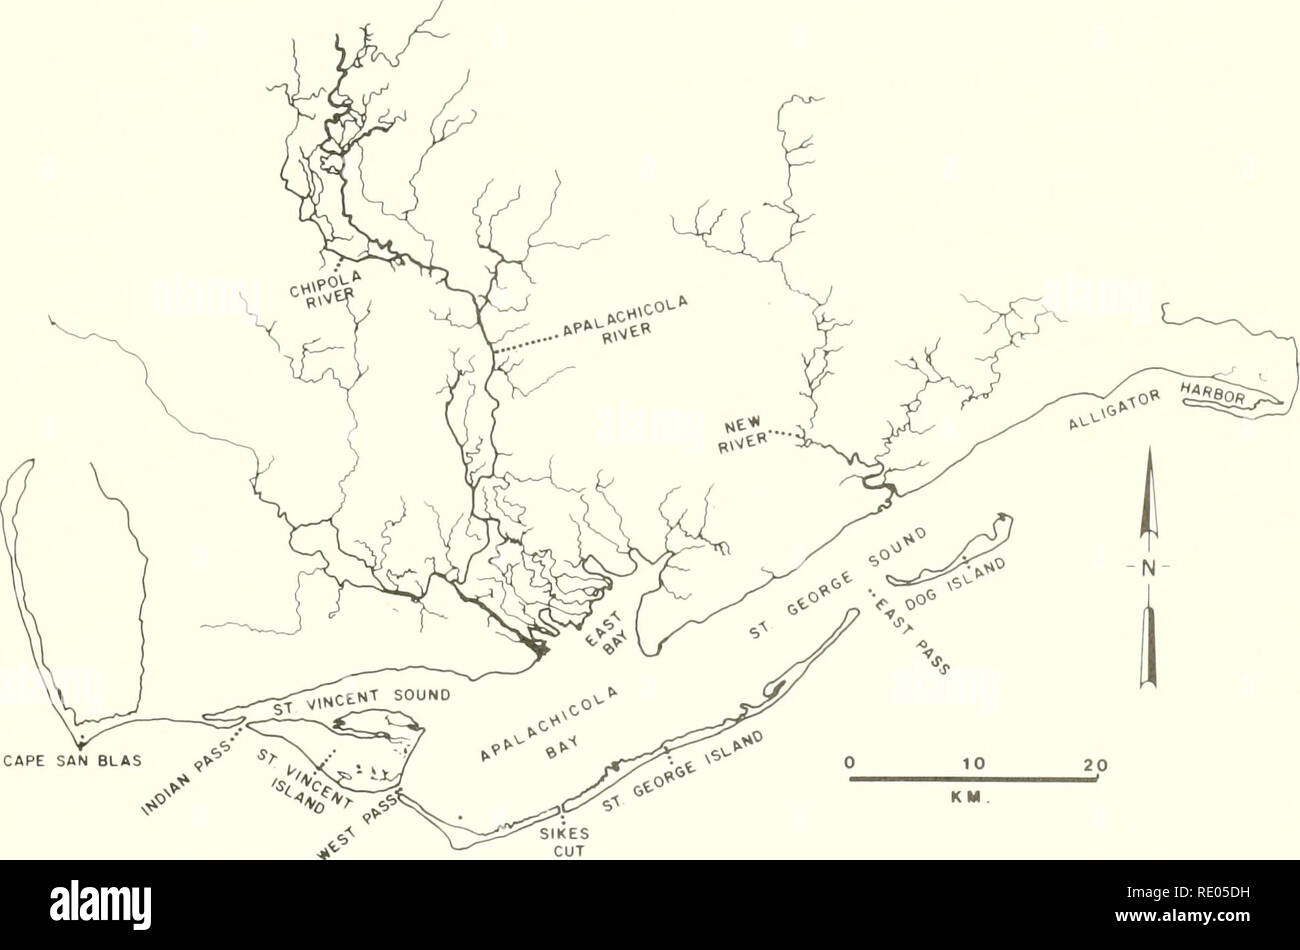 . The ecology of the Apalachicola Bay system : an estuarine profile. Estuarine ecology -- Florida Apalachicola Bay; Estuarine area conservation -- Florida. P;65 m3 sec-l (23,'^00 ft^ sec'l) measured at Blountstown, Florida. Maximum and minimum discharqes over the pa&lt;;t 1? years are 4,600 m^ sec&quot;! (162,^^00 cfs) and 178 m^ sec&quot;l (6,280 cfs), respectively. The river and, secondarily, local rainfall determine the distribution o^&quot; salinity in the estuary. The placement of the barrier islands also has a maior influence on the salinity reqime of the estuary (Livinqston 1^79, iq84a) Stock Photo